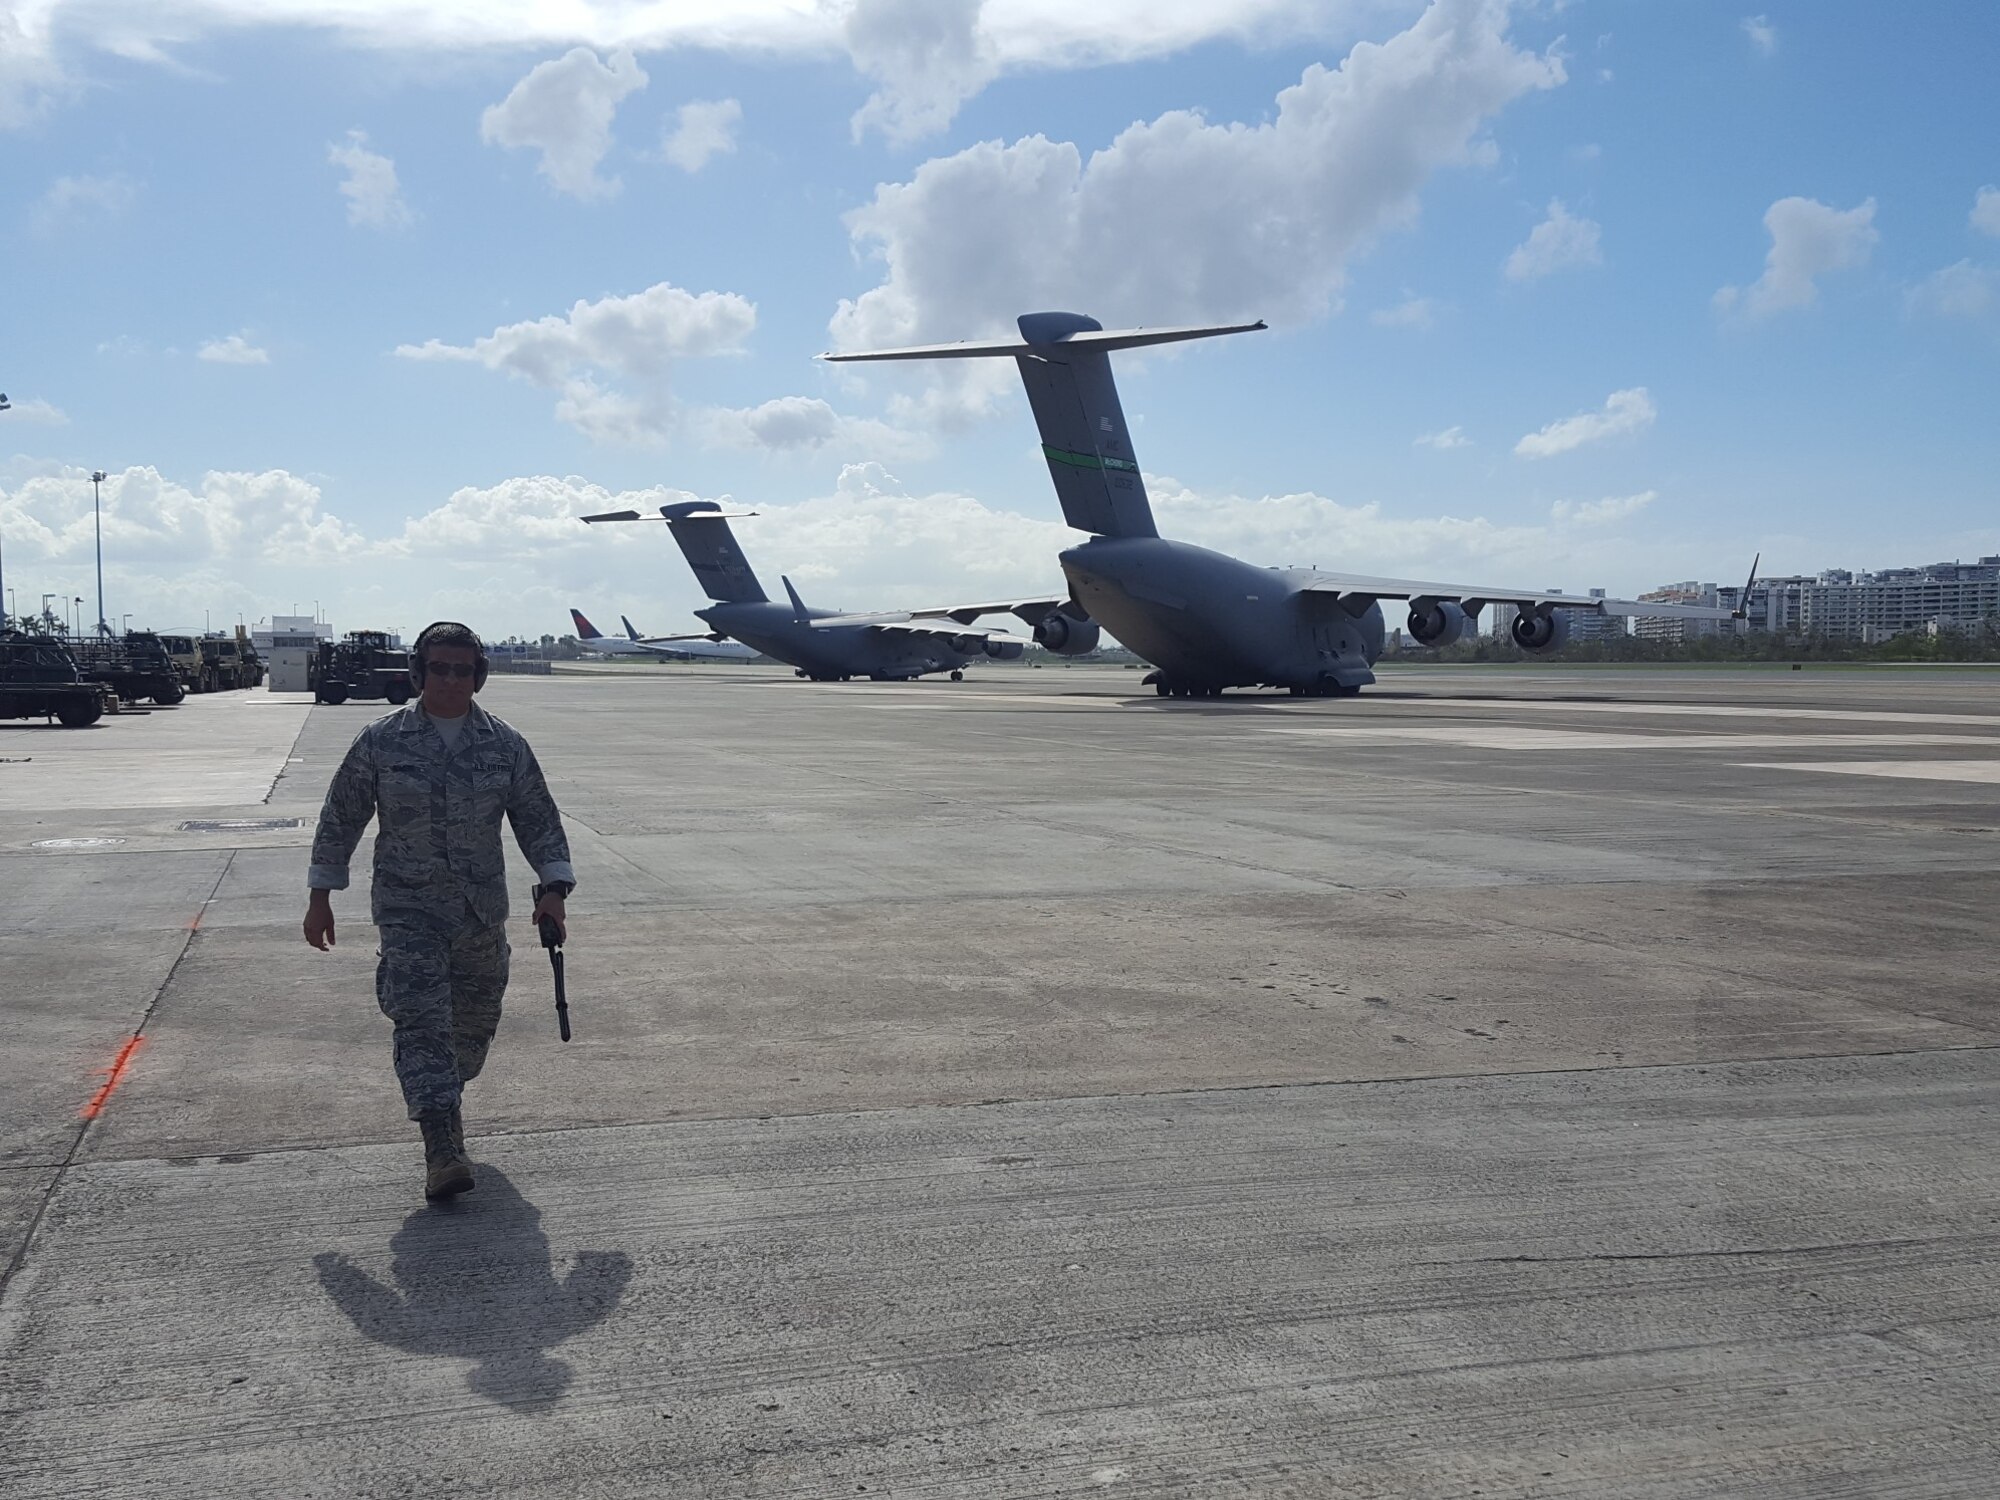 Master Sgt. Alan Romero, an airfield manager for the 167th Airlift Wing, provides support to airfield operations at the Luis Munoz Marin International Airport in San Juan, Puerto Rico. Romero deployed to San Juan shortly after Hurricane Maria devastated the island last month.